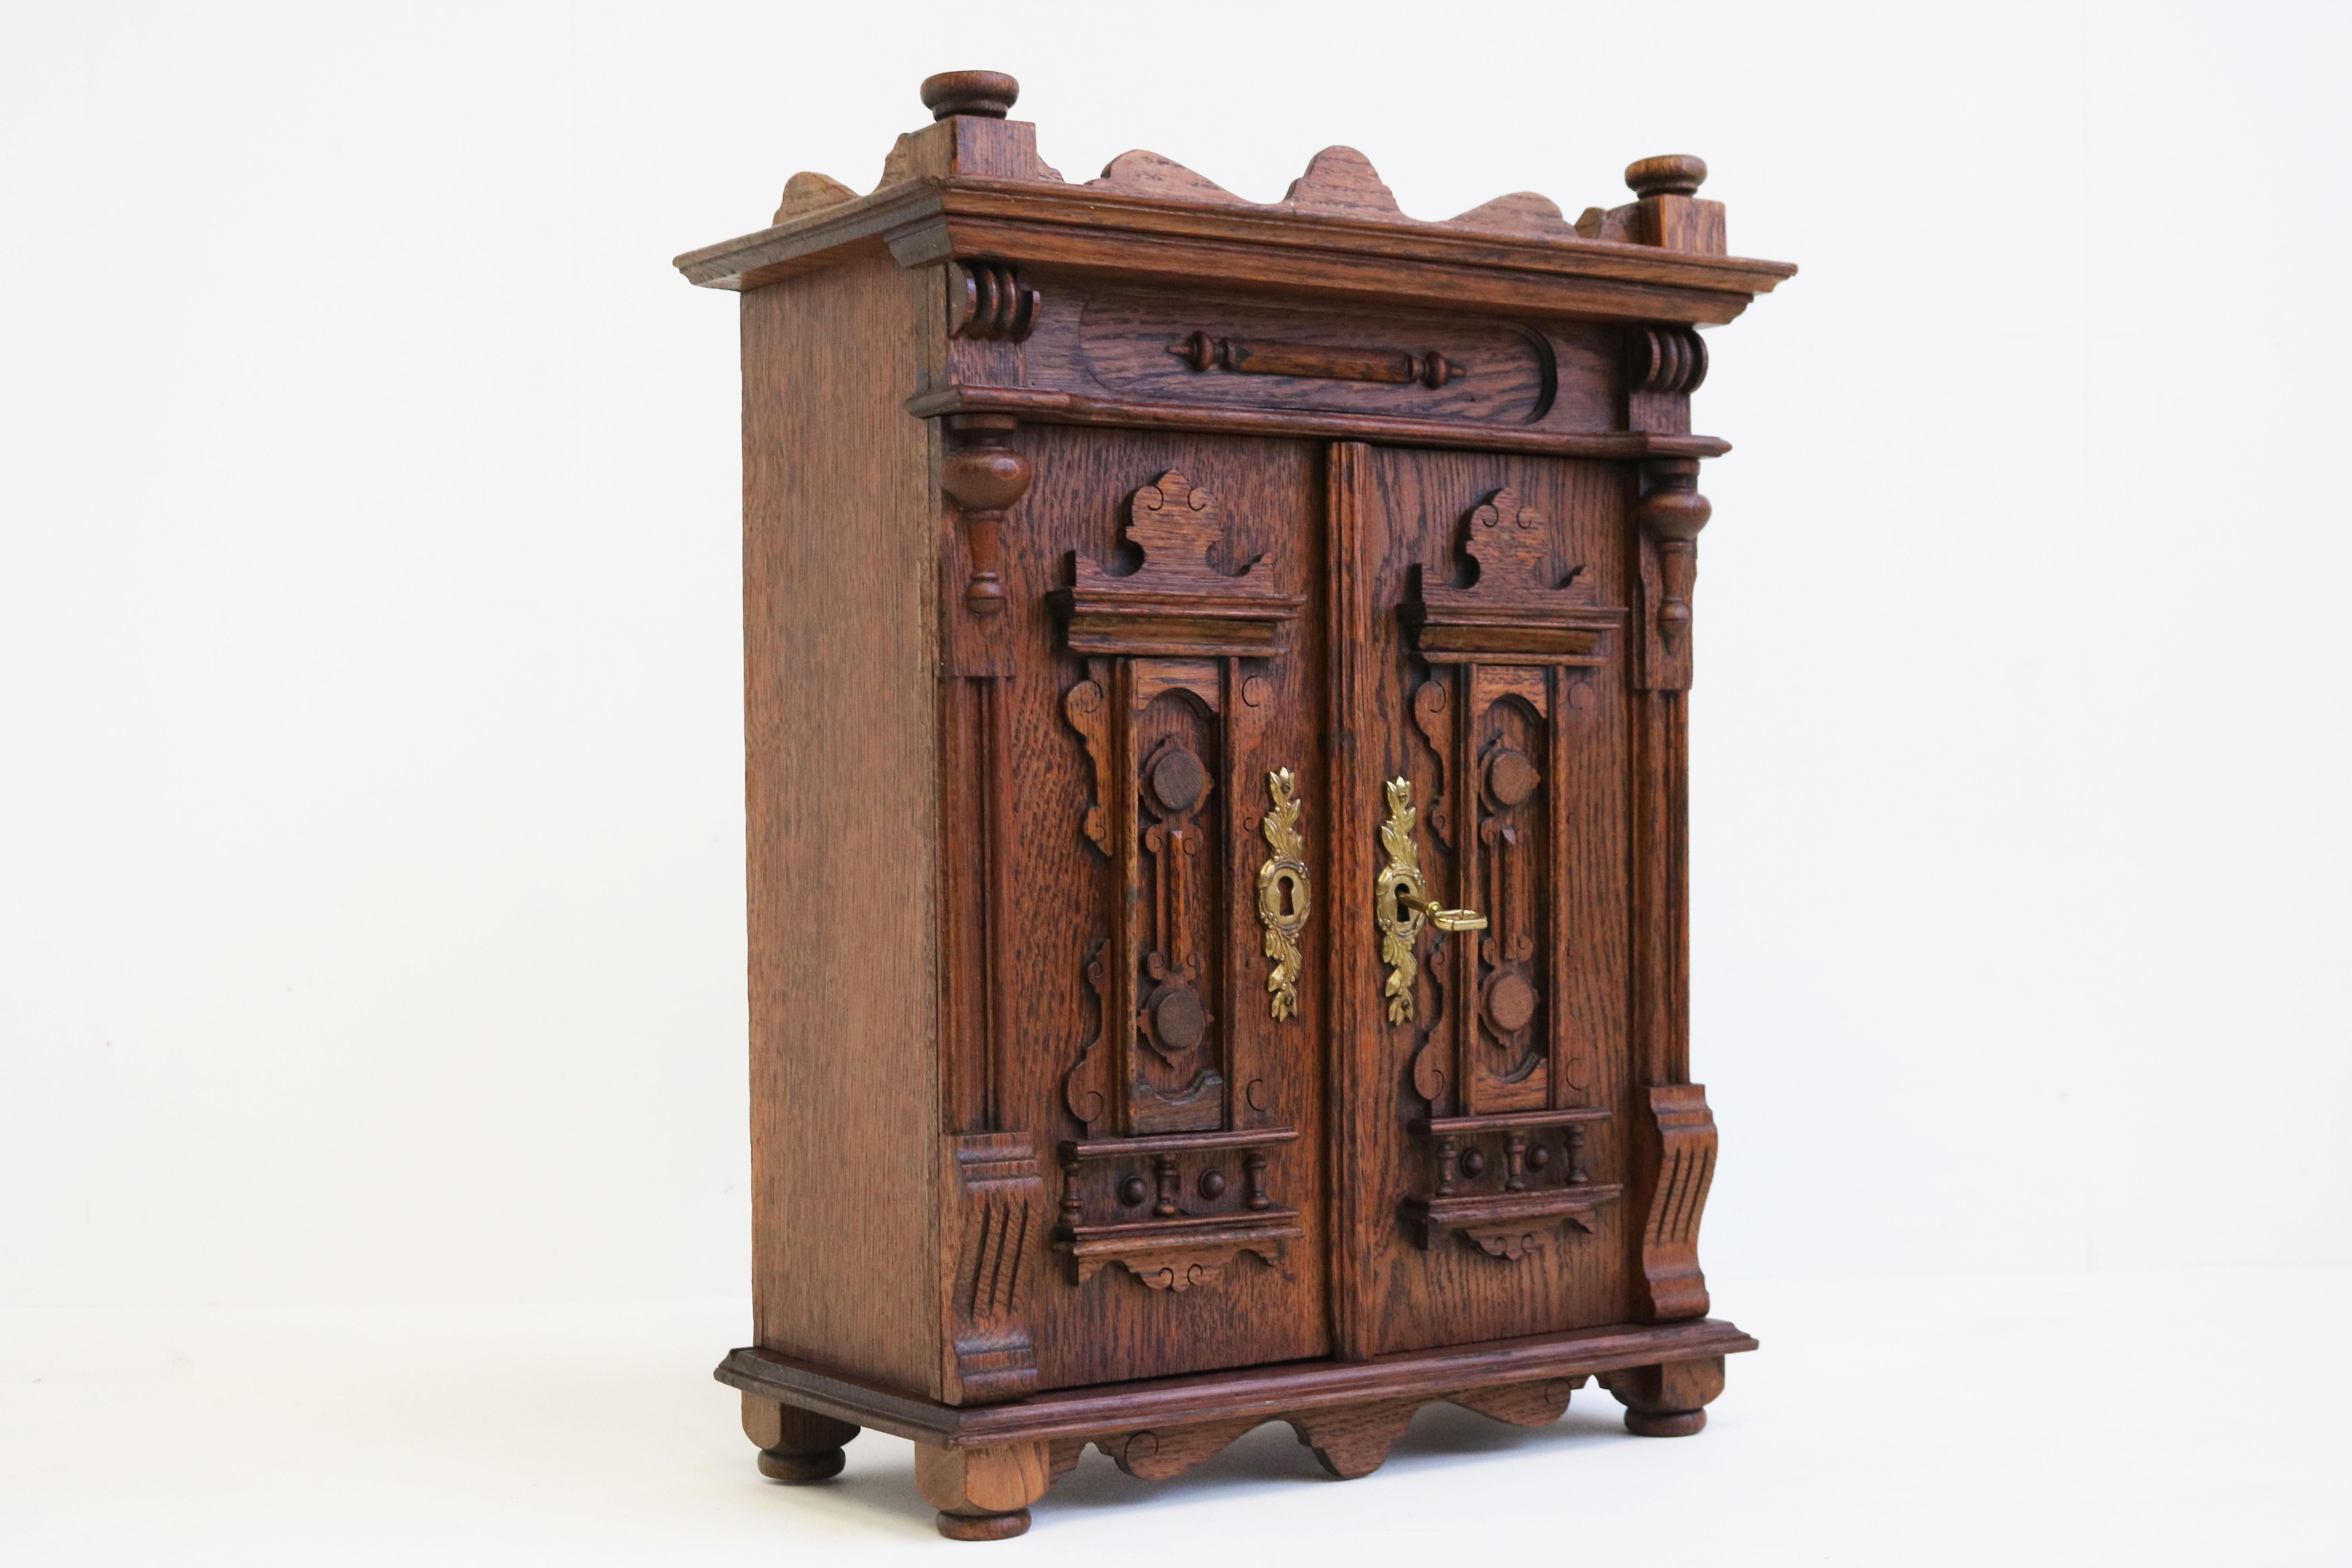 Lovely antique 19th century Neoclassical wall cabinet / small cabinet Germany 1880.
This German Grunderzeit cabinet is made from hand carved oak & is richly decorated. 
A true display of craftsmanship & quality.
This cabinet has 2 doors and comes